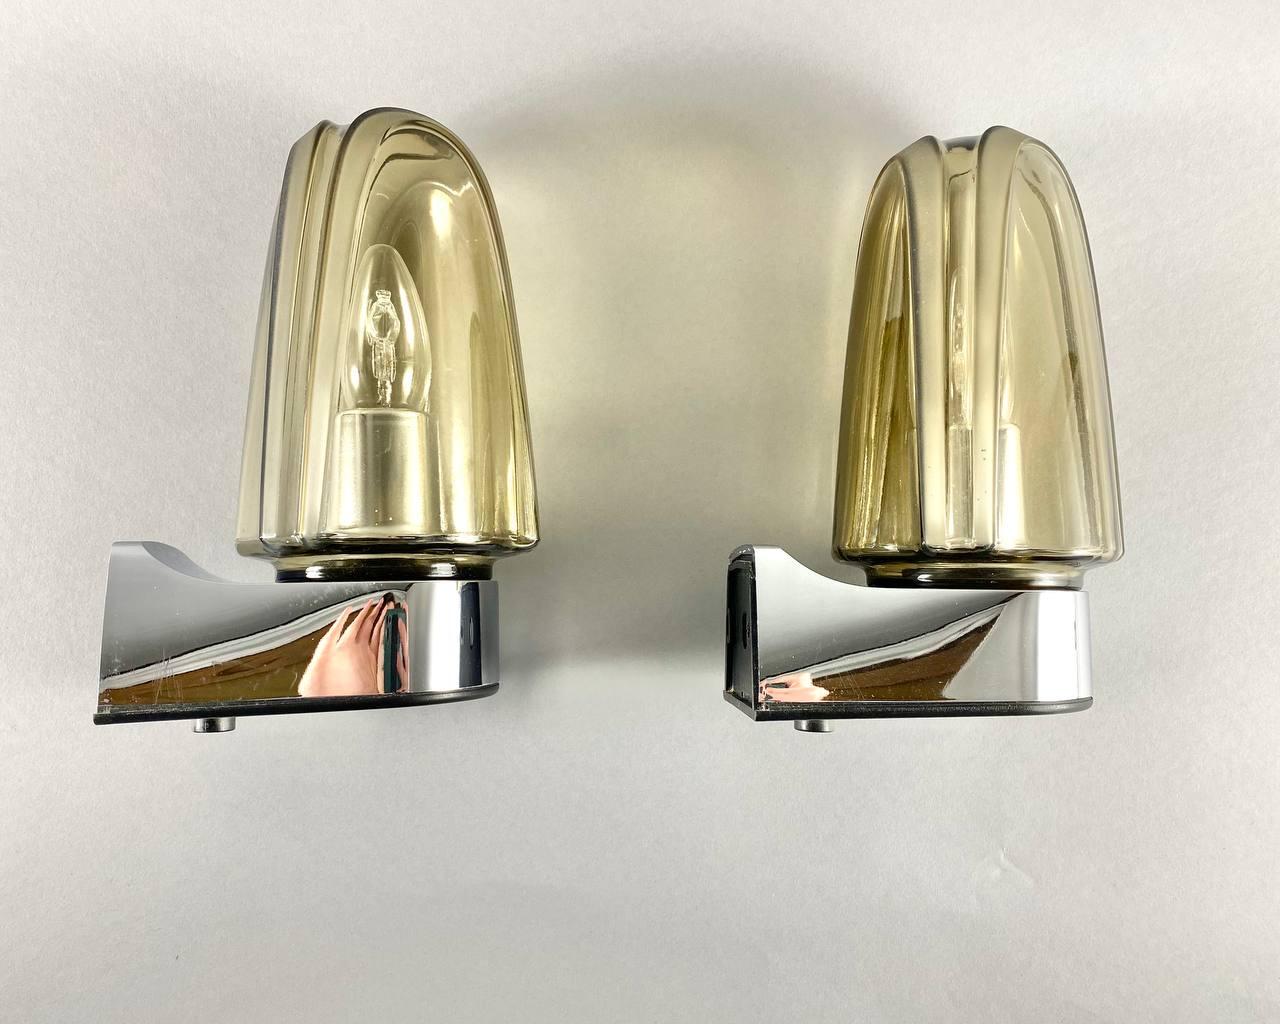 Hoffmeister-Leuchten Paired Wall Sconces, Germany, Designer Wall Lamps, Vintage  For Sale 1